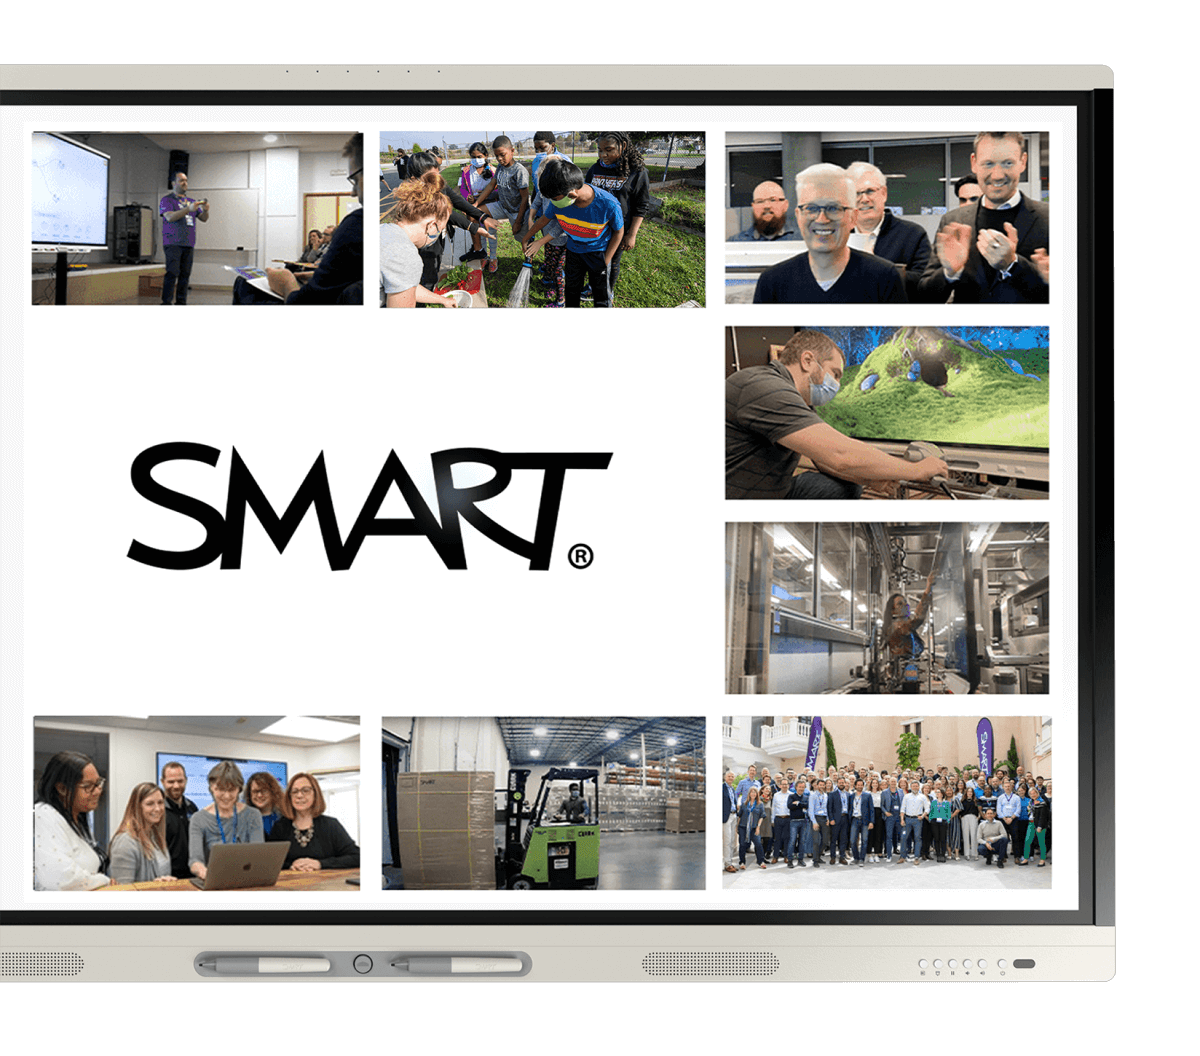 An image collage on a SMART Board MX series display featuring various scenes of people using SMART technology in different environments, including a classroom, outdoor learning, a business meeting, an industrial setting, and a group photo of team members.